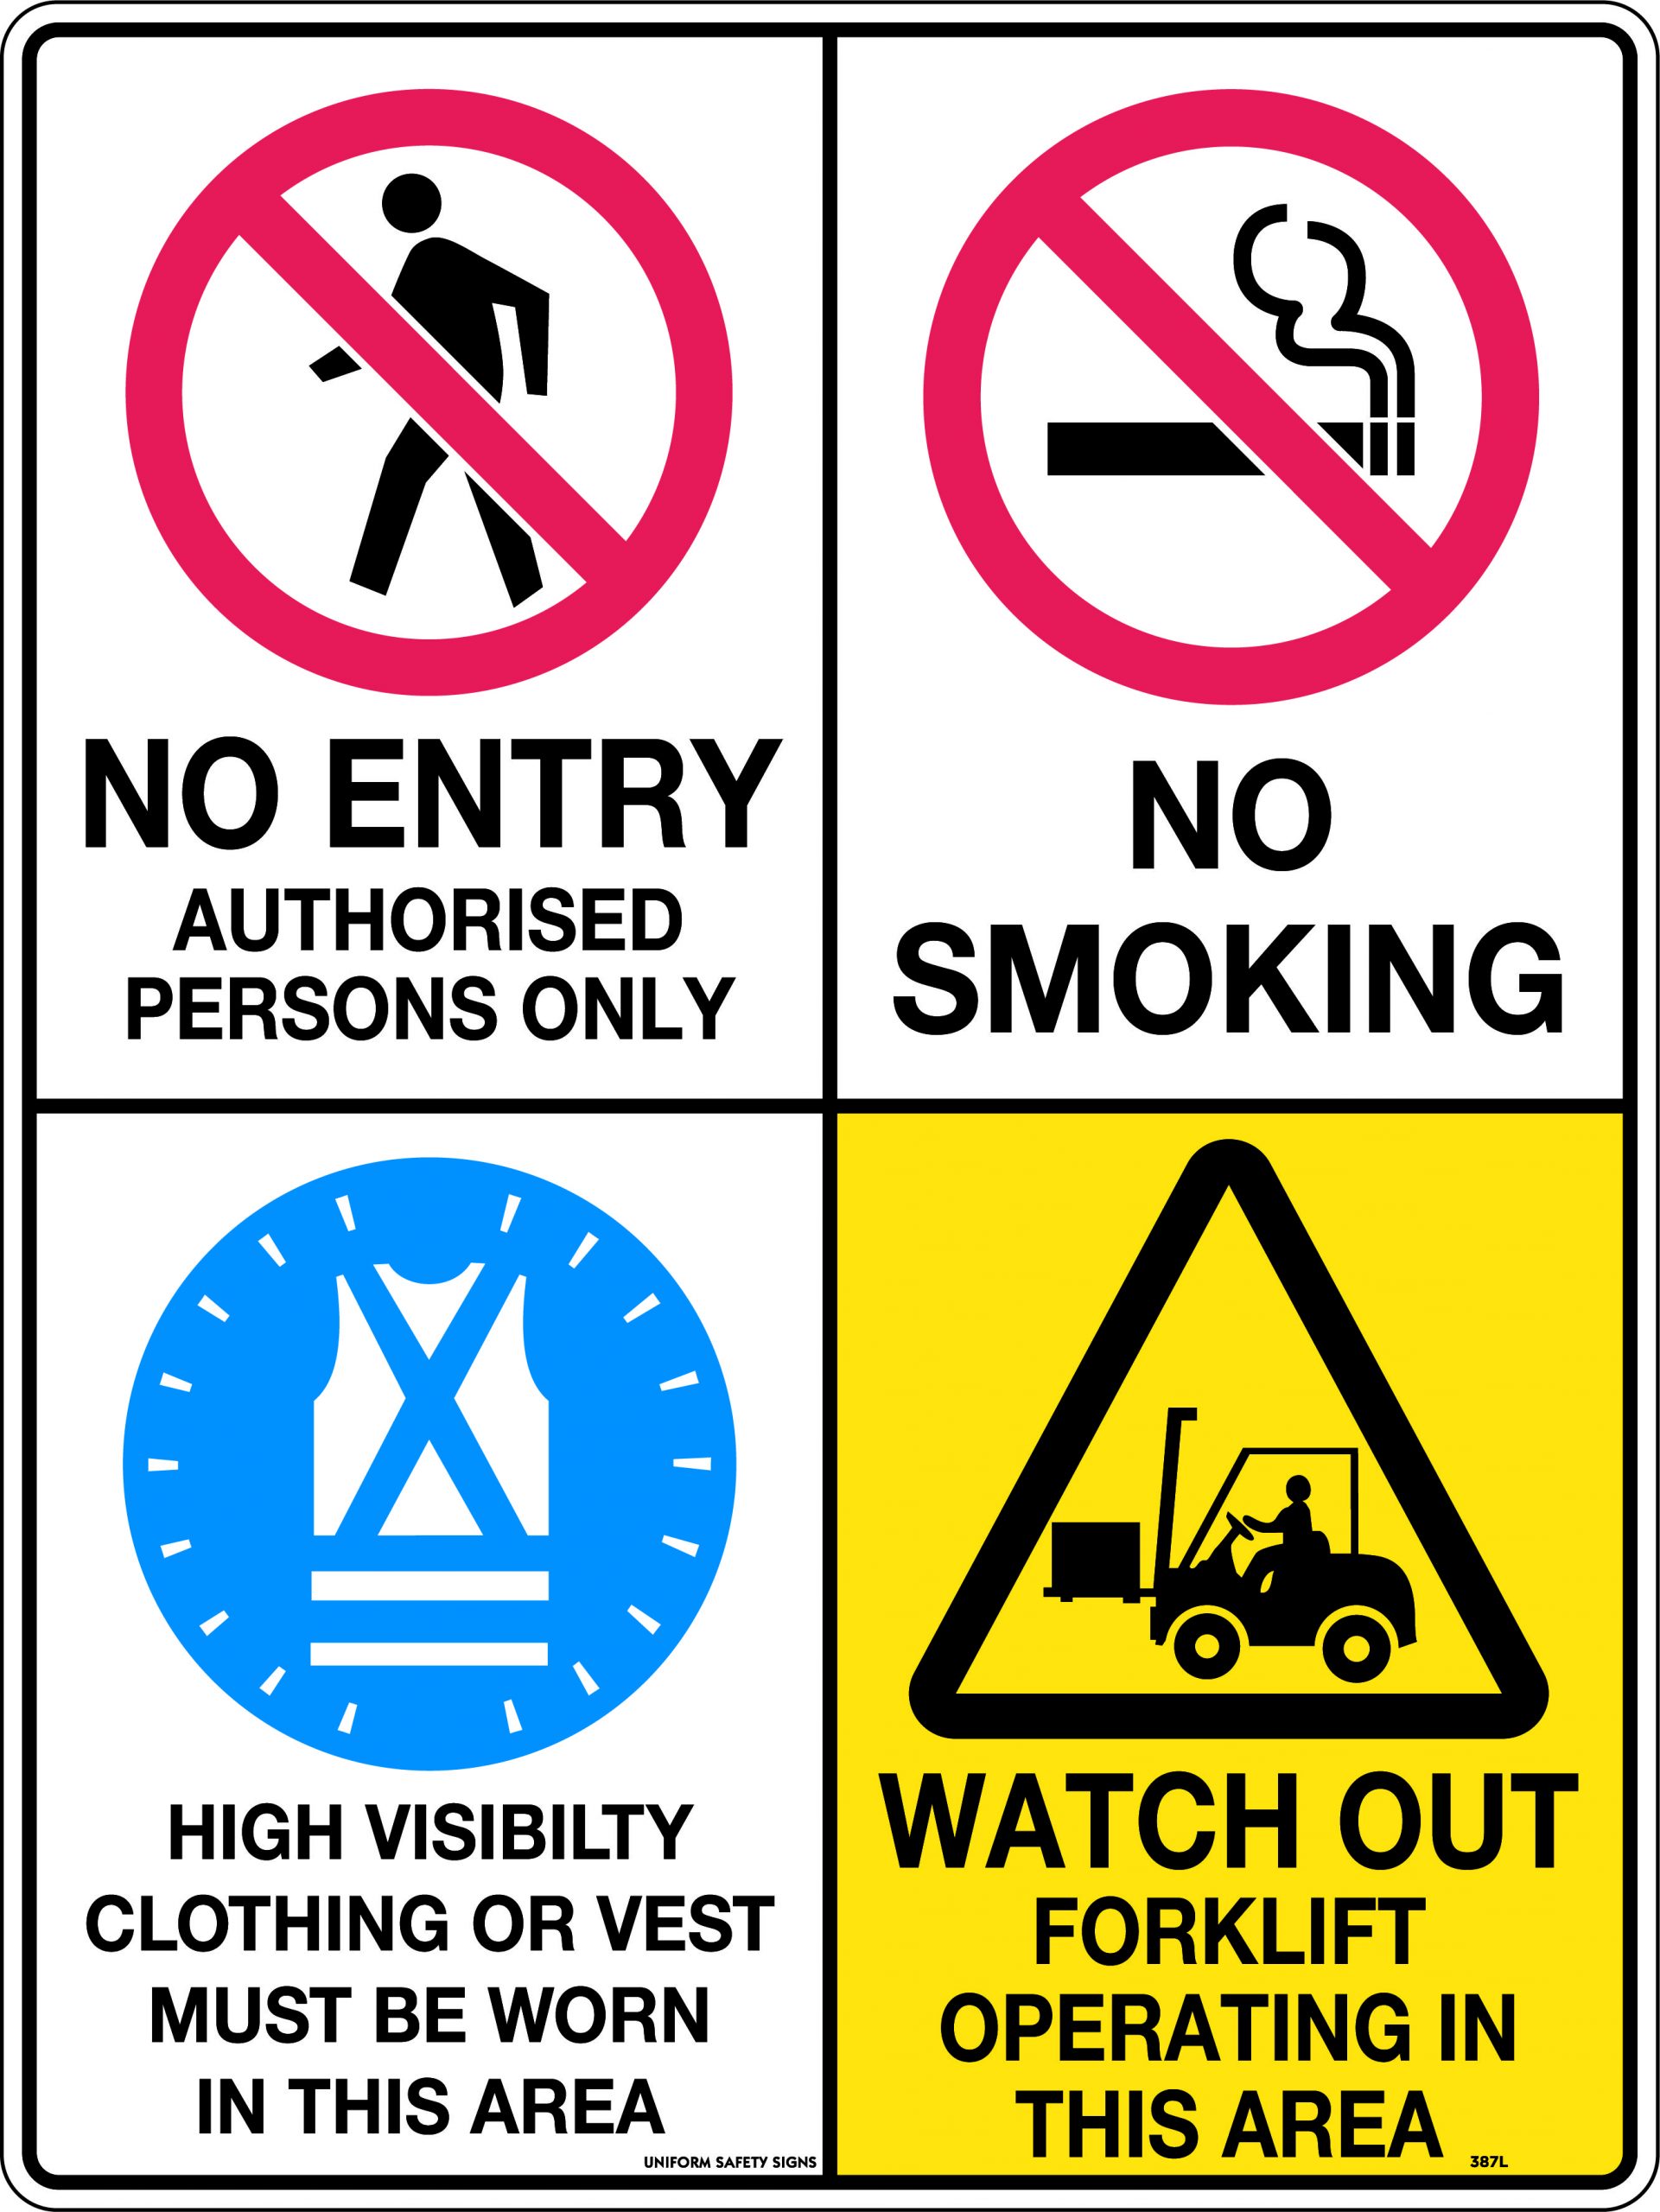 SIGN 600 X 450 FLUTE NO ENTRY/ NO SMOKING/ HI VIS/ WATCH OUT FOR FORKLIFTS